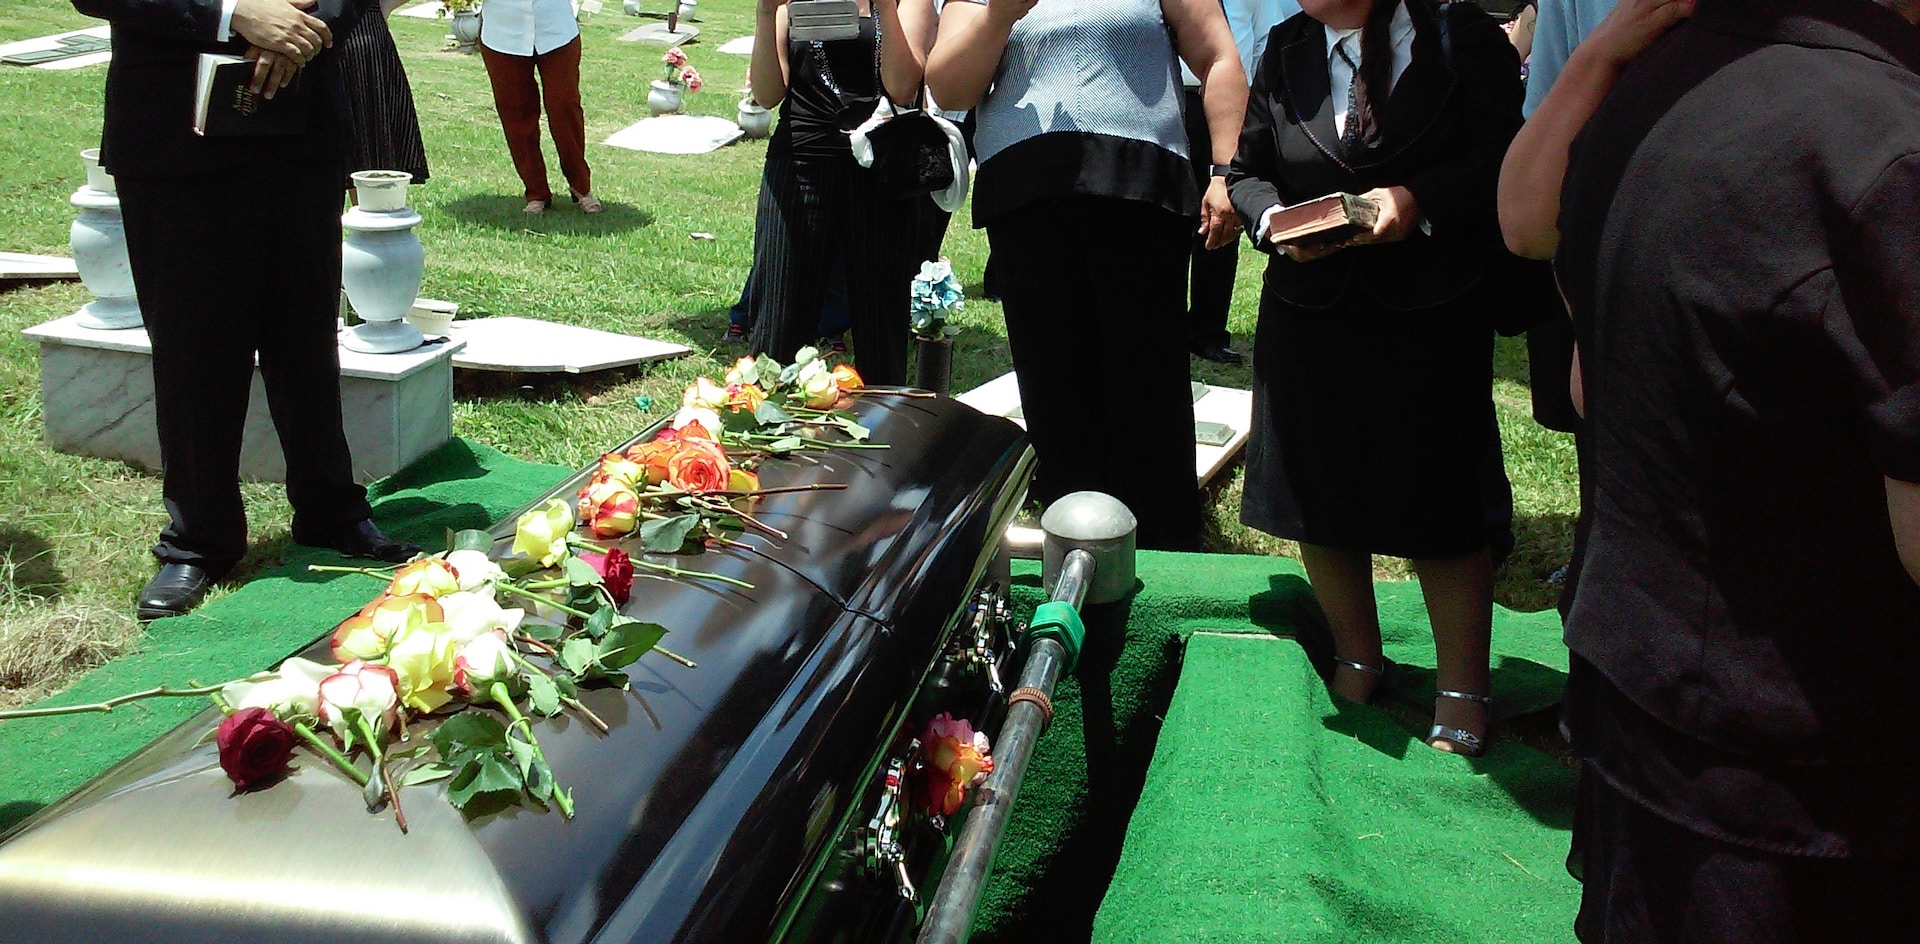 Dressing for a funeral. Image of people dressed in black around a casket